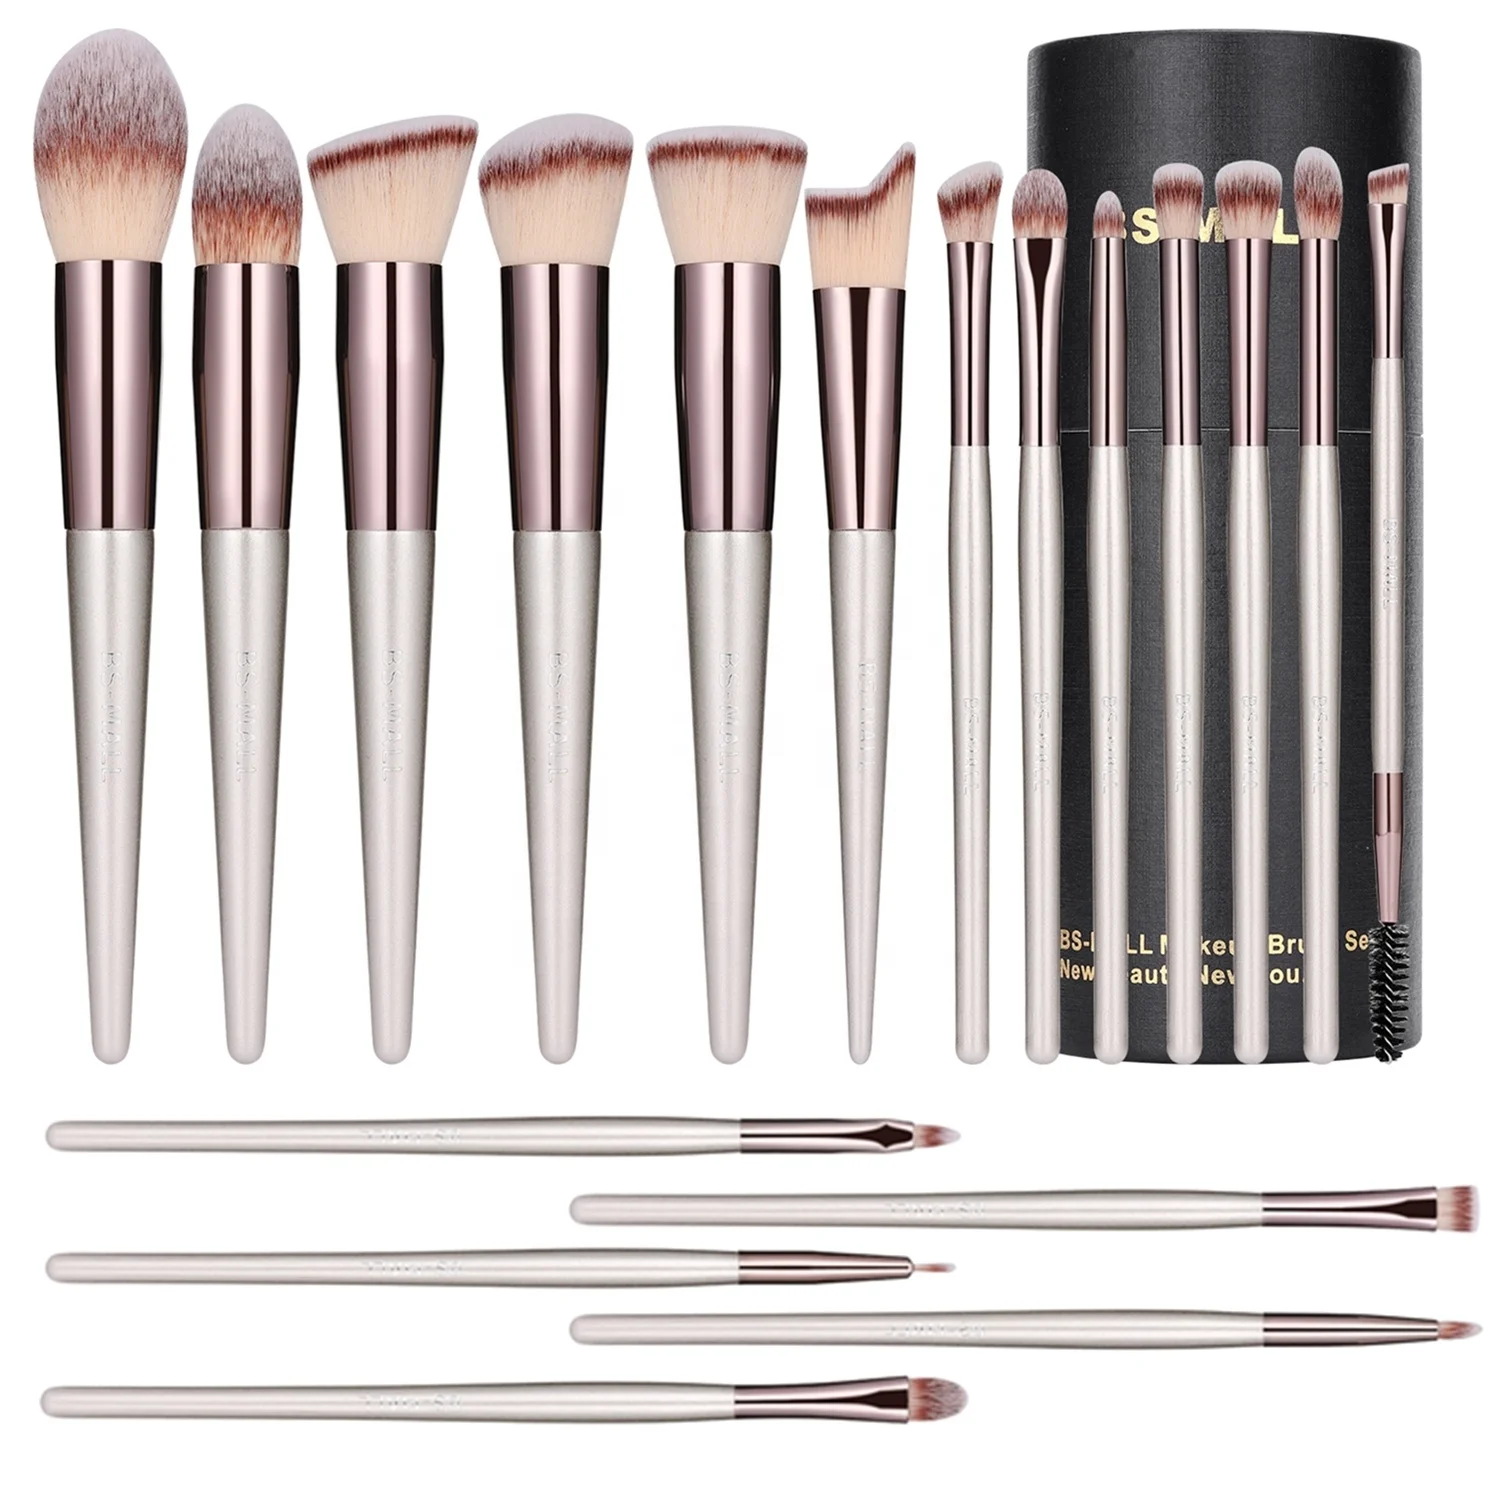 

BS-MALL 18 Pcs Premium Synthetic Makeup Brushes Makeup Blending Brushes Private Label Champagne Gold Makeup Brushes With Case, Picture or customized color